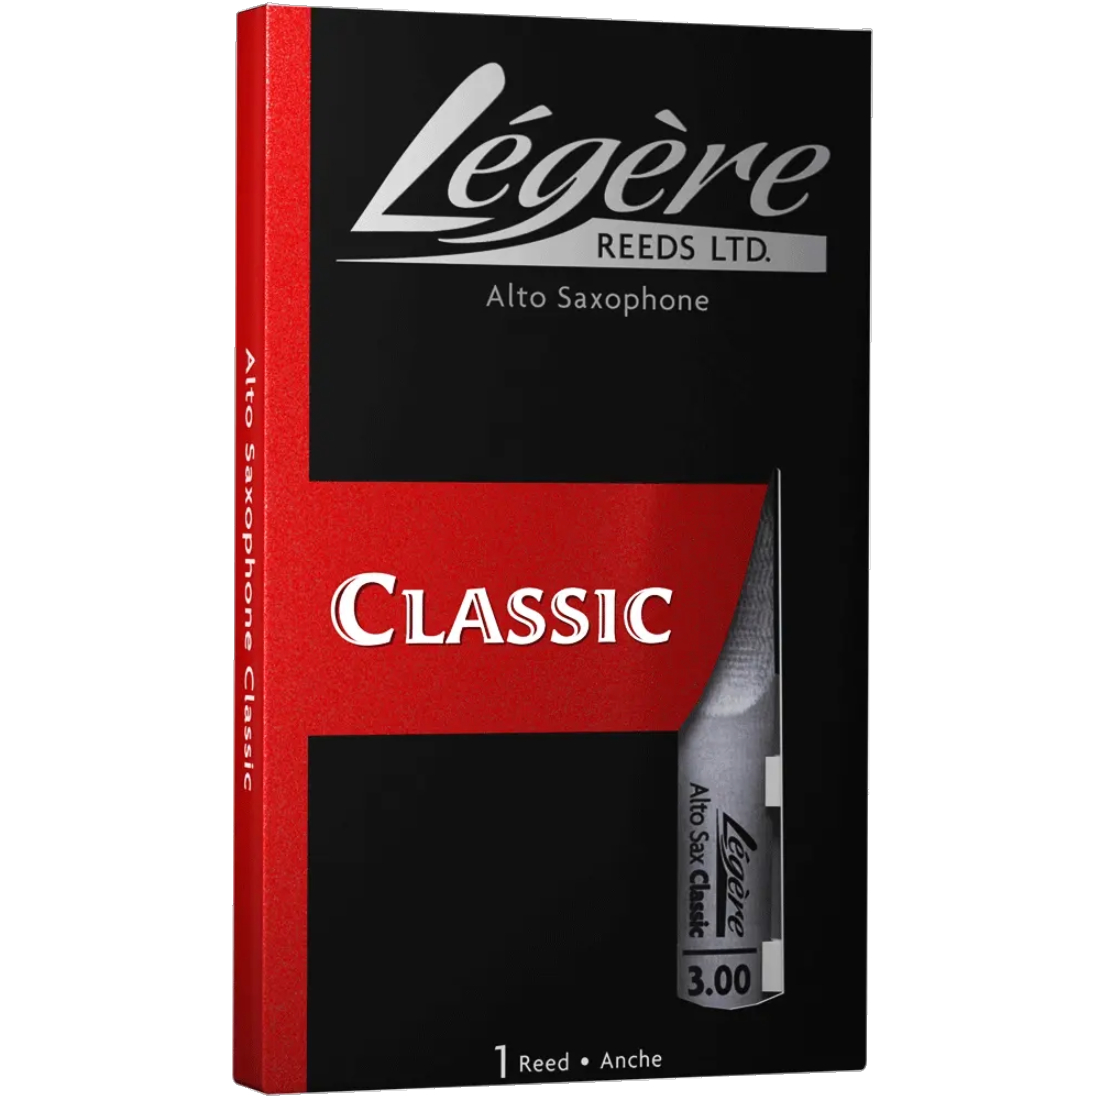 Black and red box of classic Legere synthetic alto sax reeds